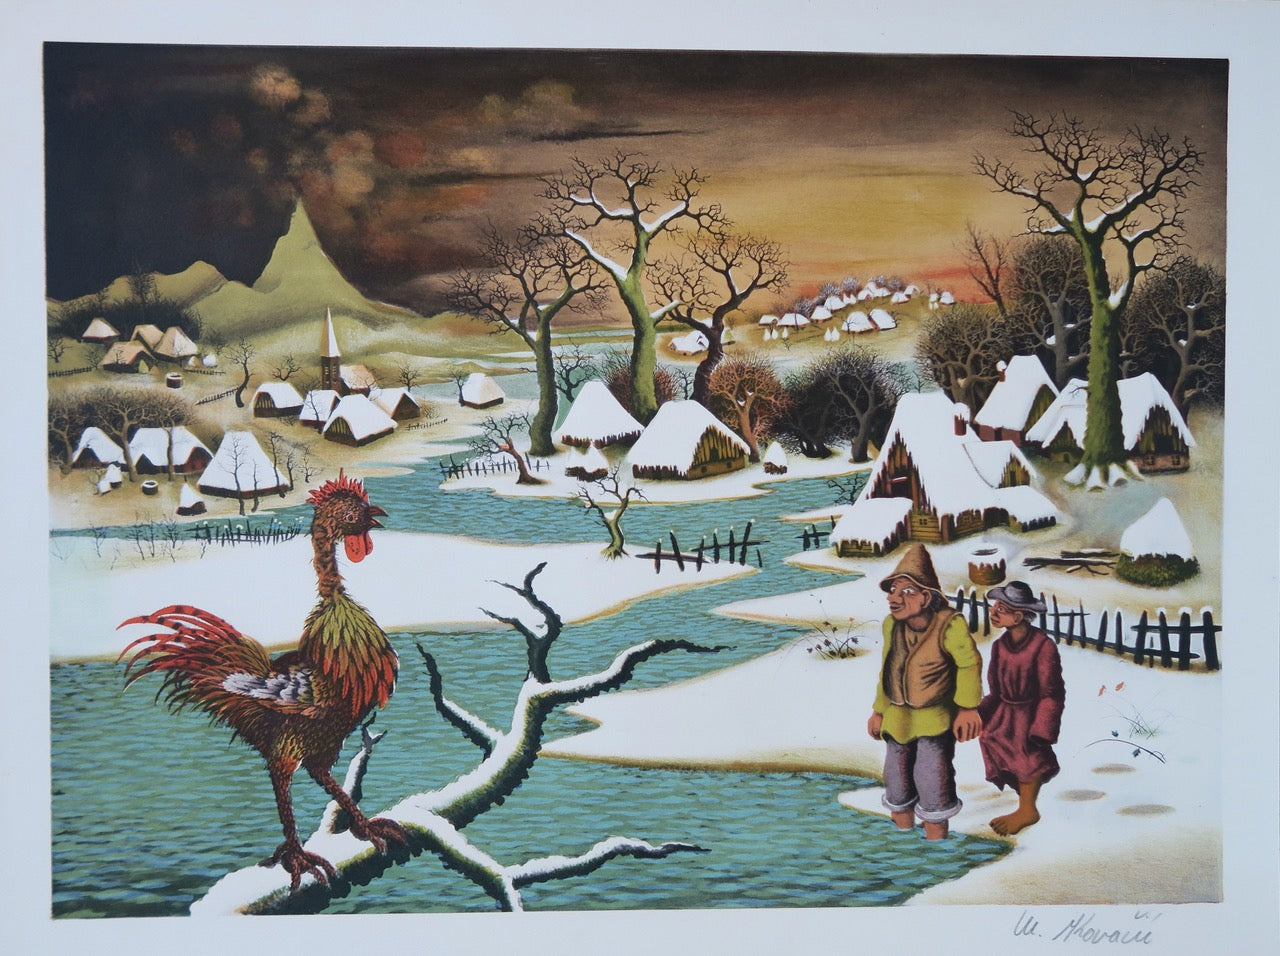 Mijo Kovacic (1935) - Winter village landscape with a rooster